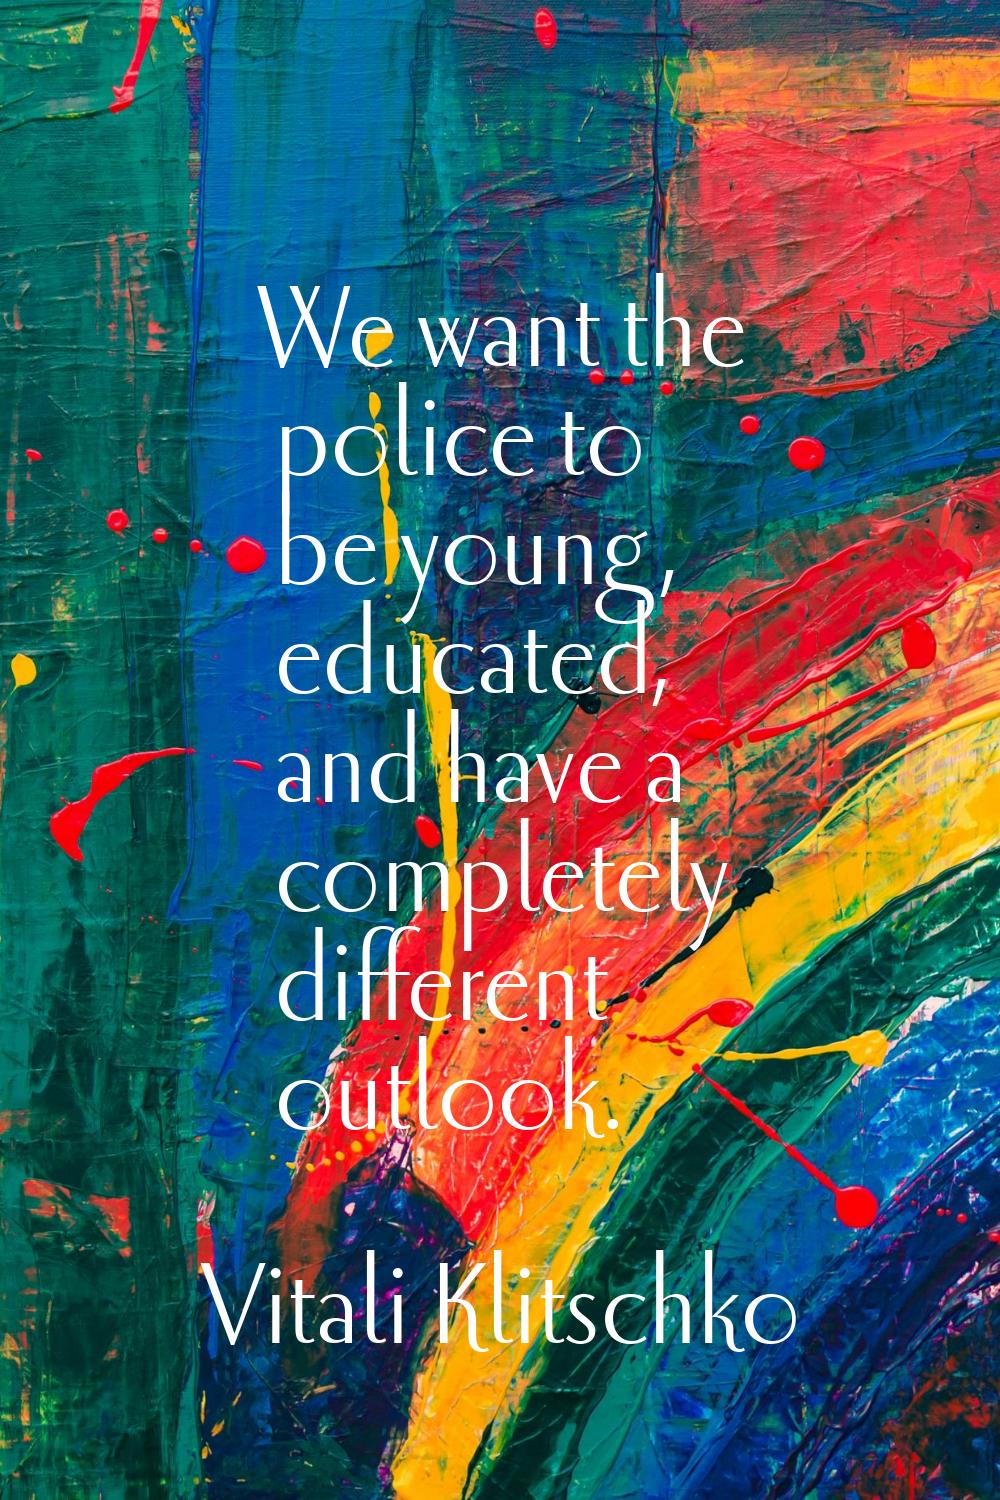 We want the police to be young, educated, and have a completely different outlook.